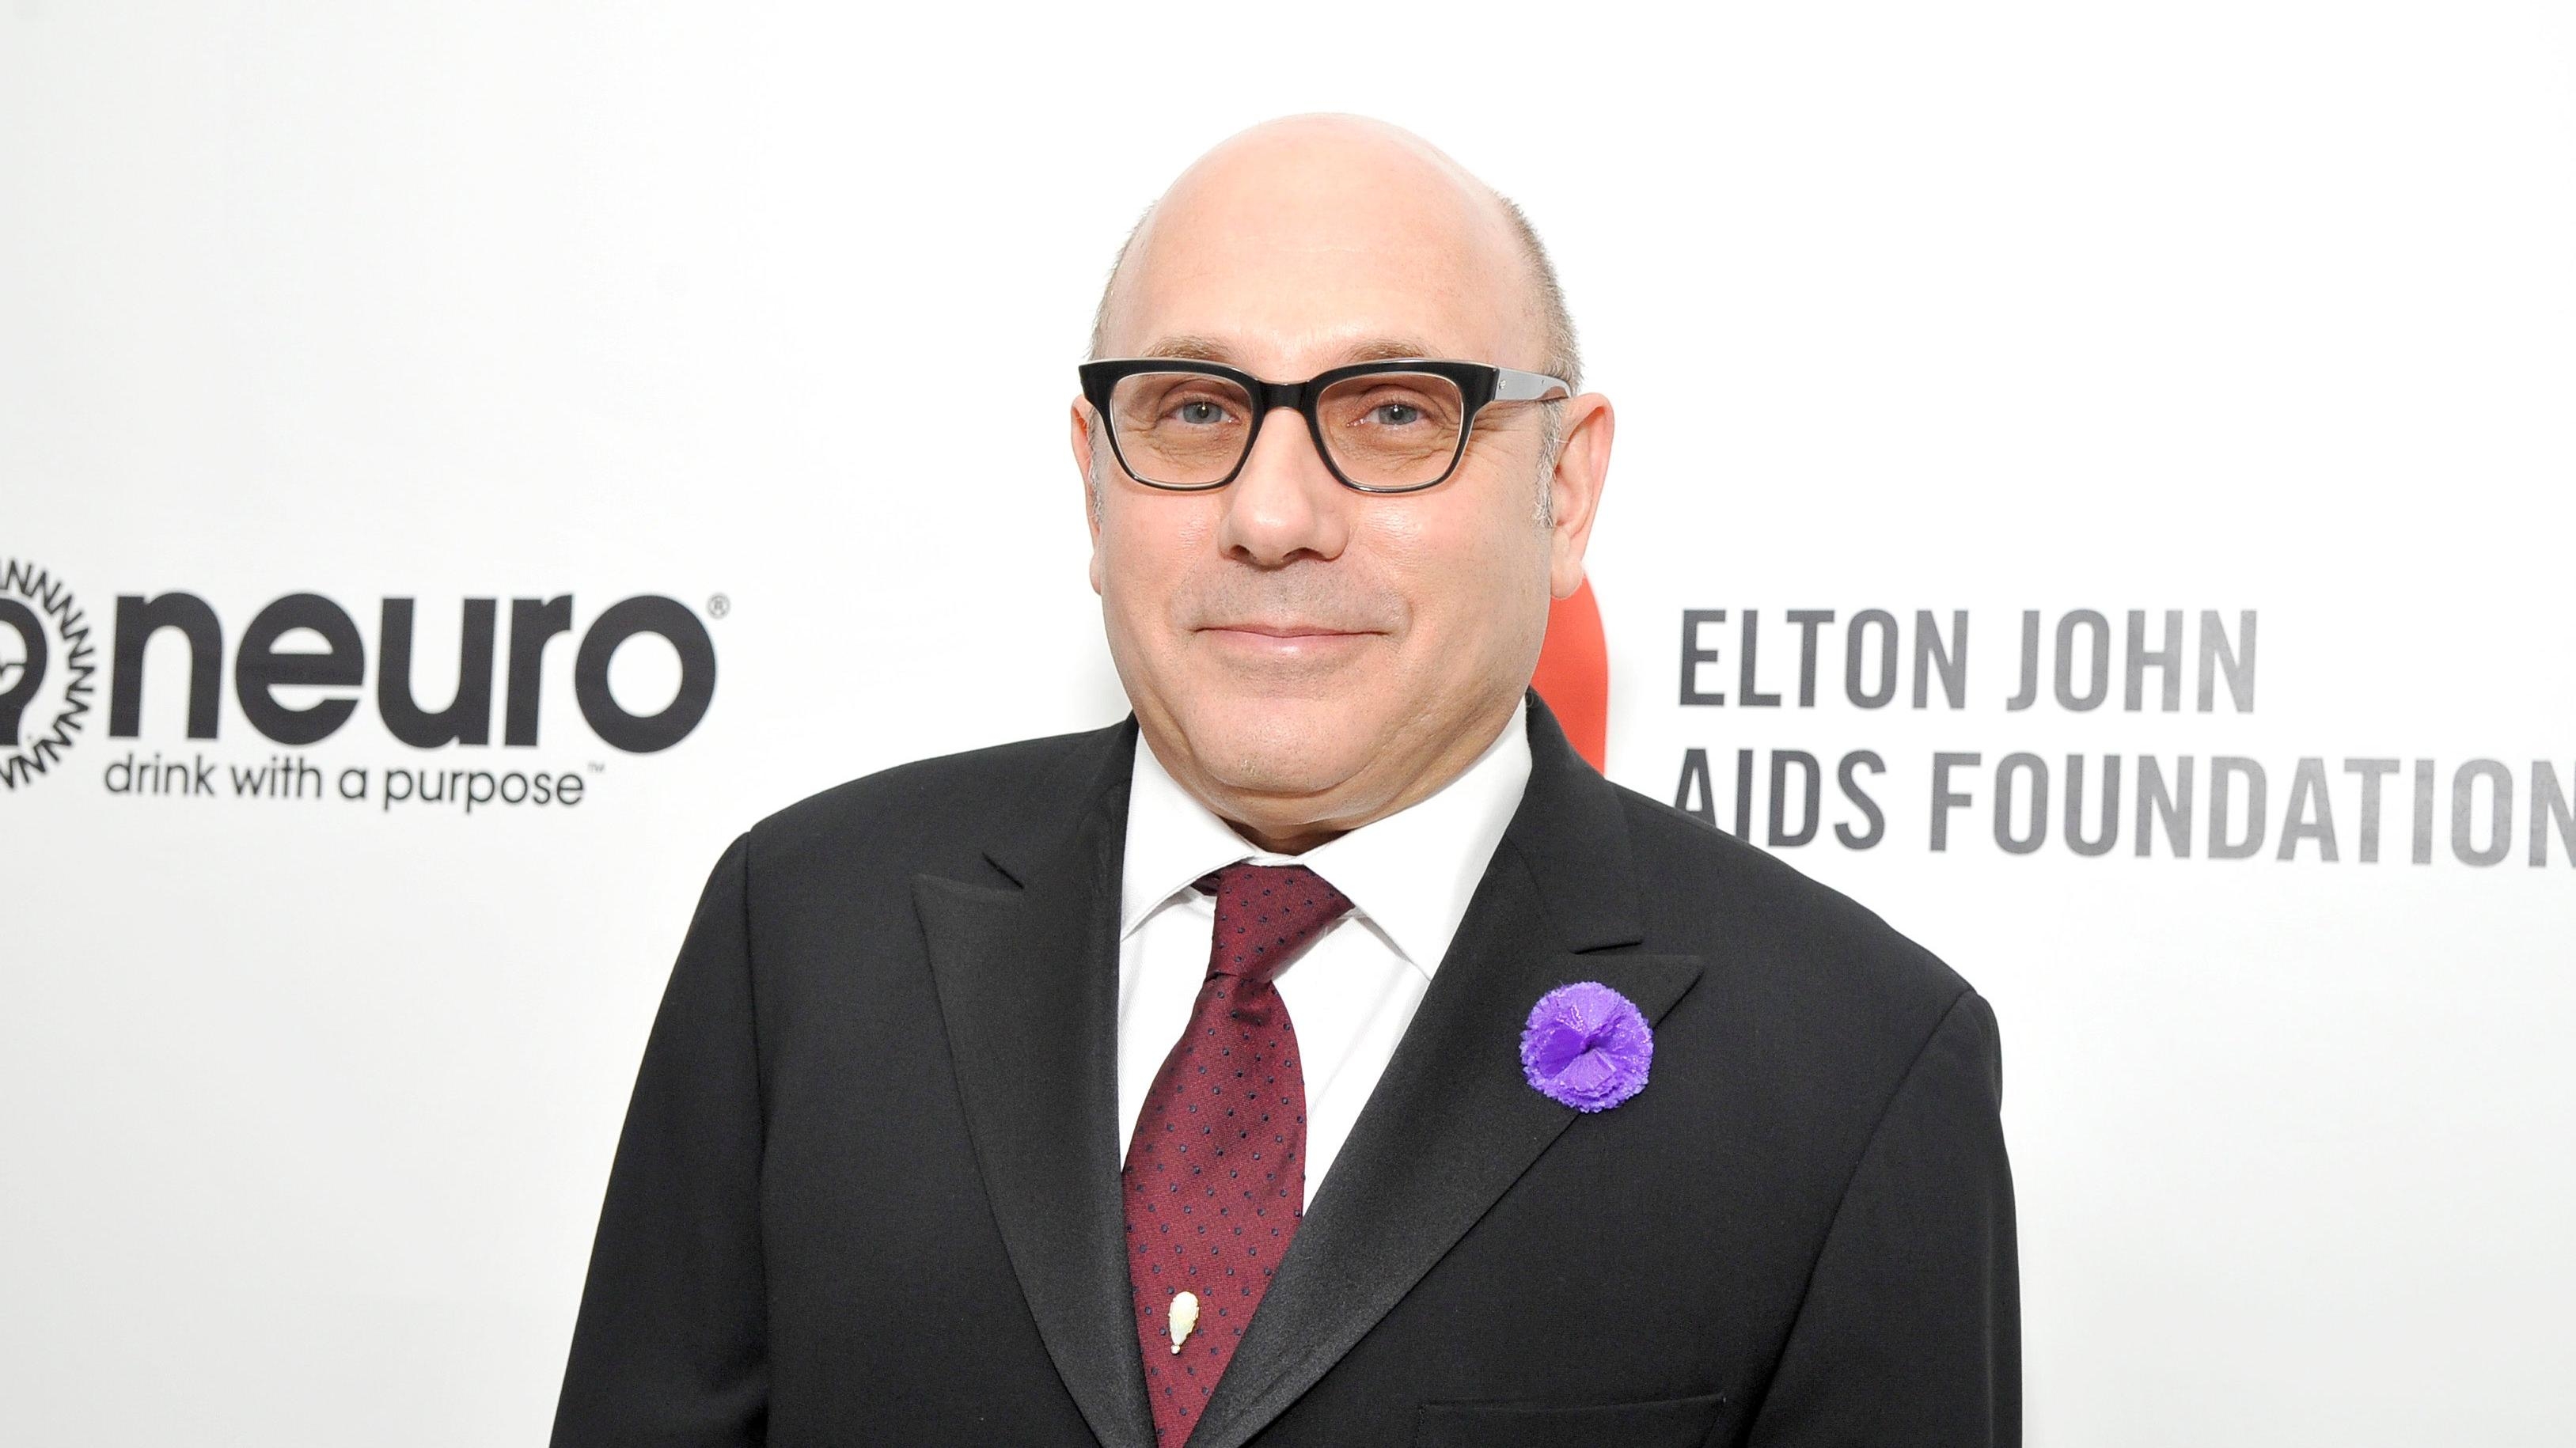 R.I.P. Willie Garson, actor from Sex And The City and White Collar